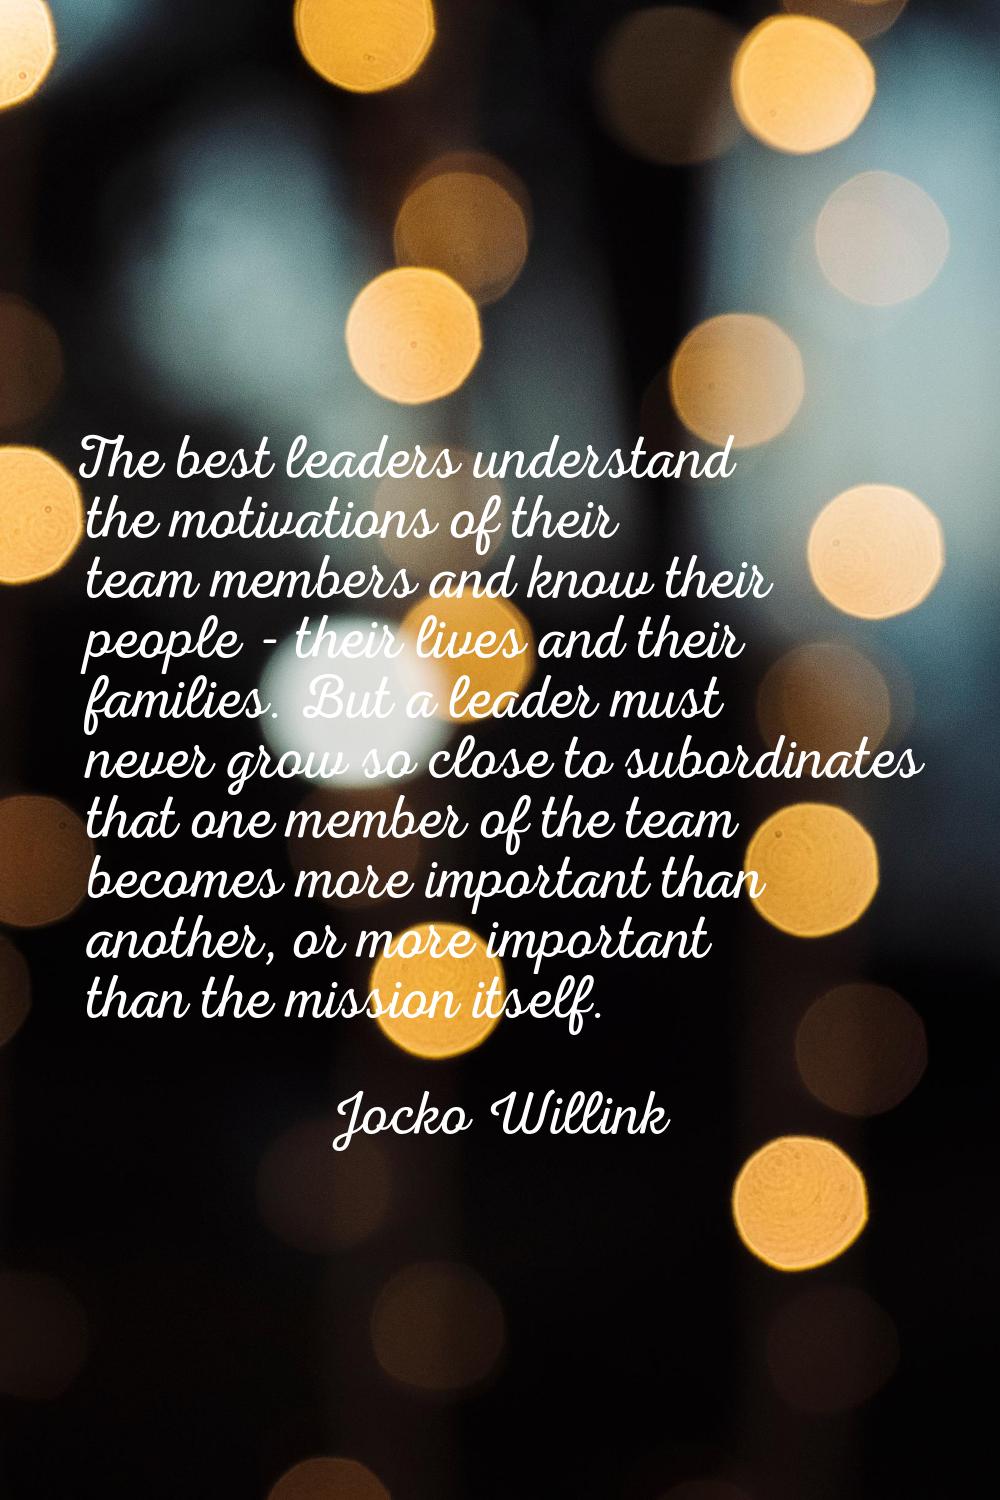 The best leaders understand the motivations of their team members and know their people - their liv